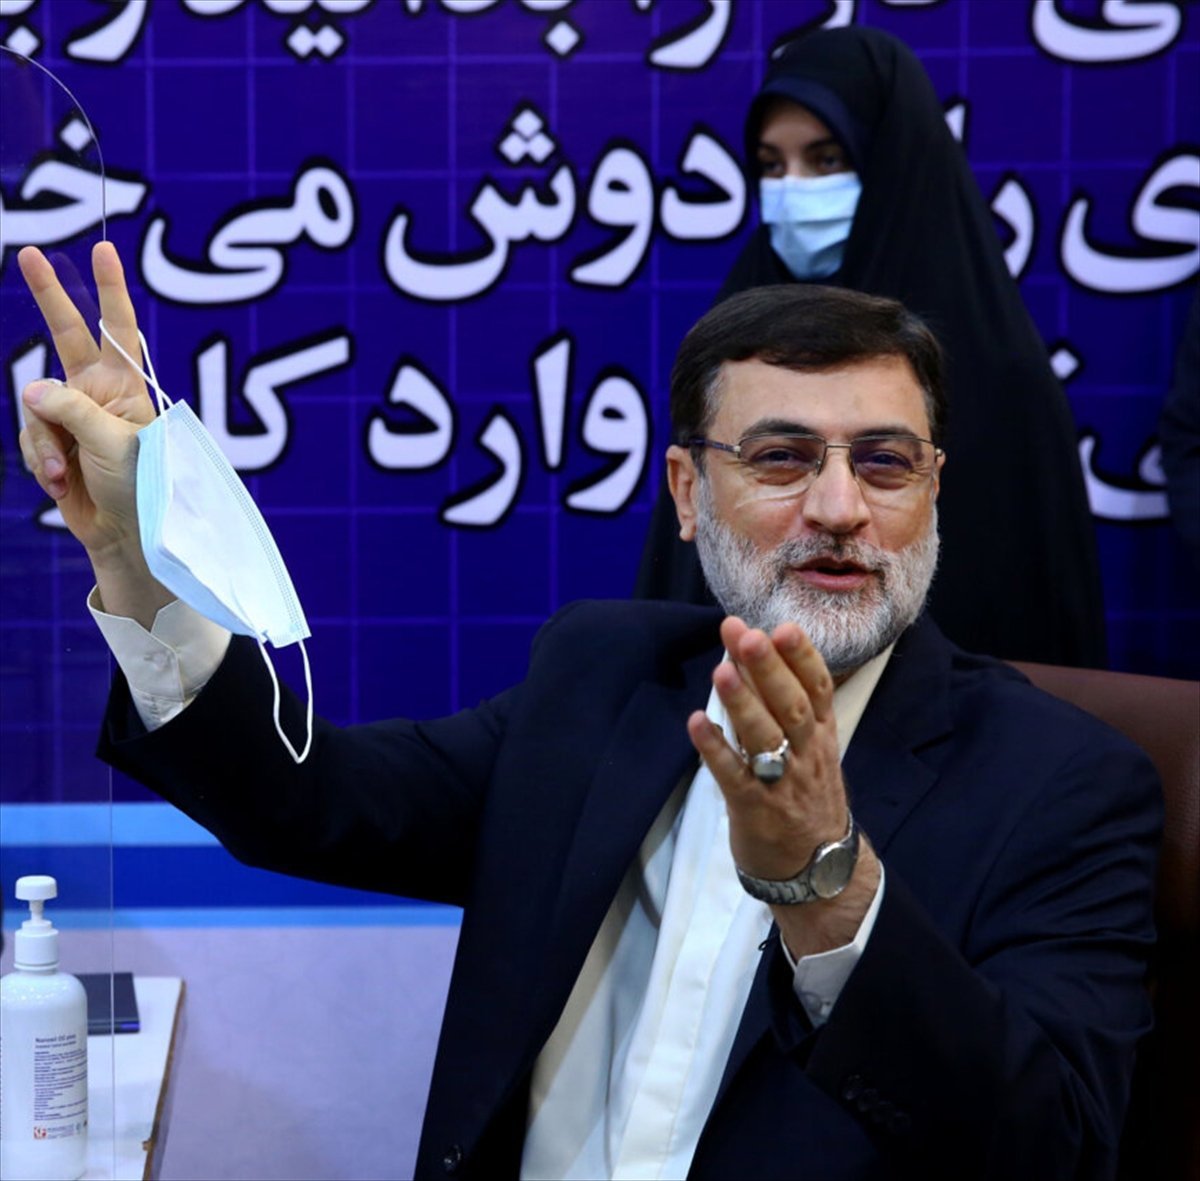 7 candidates for the presidential elections in Iran have been announced #6